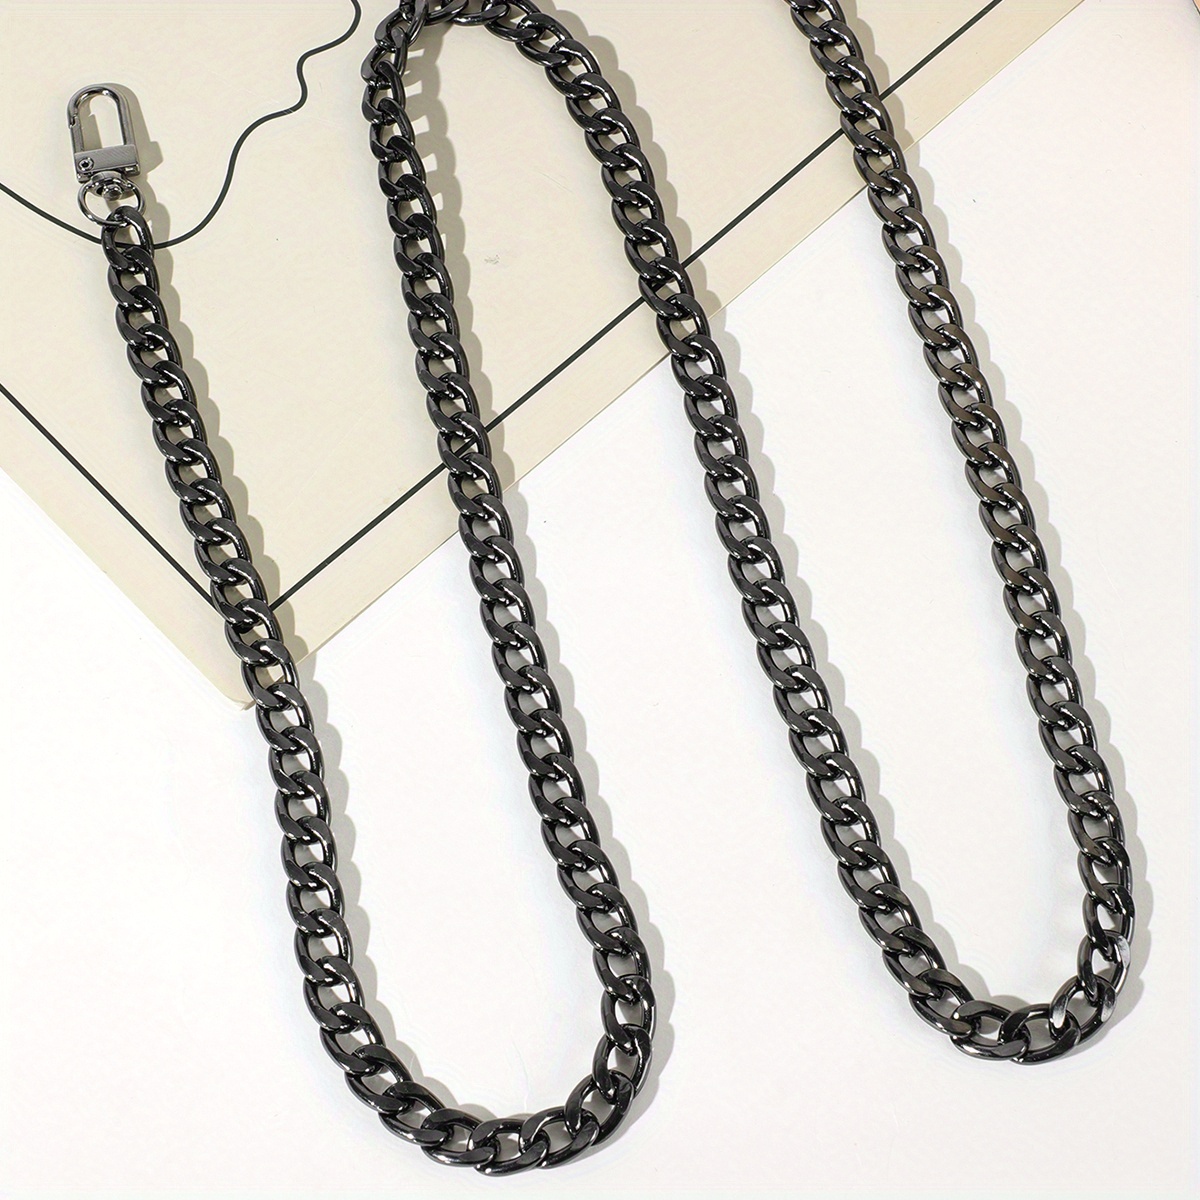 Replacement Cross Body Chain Strap Silver